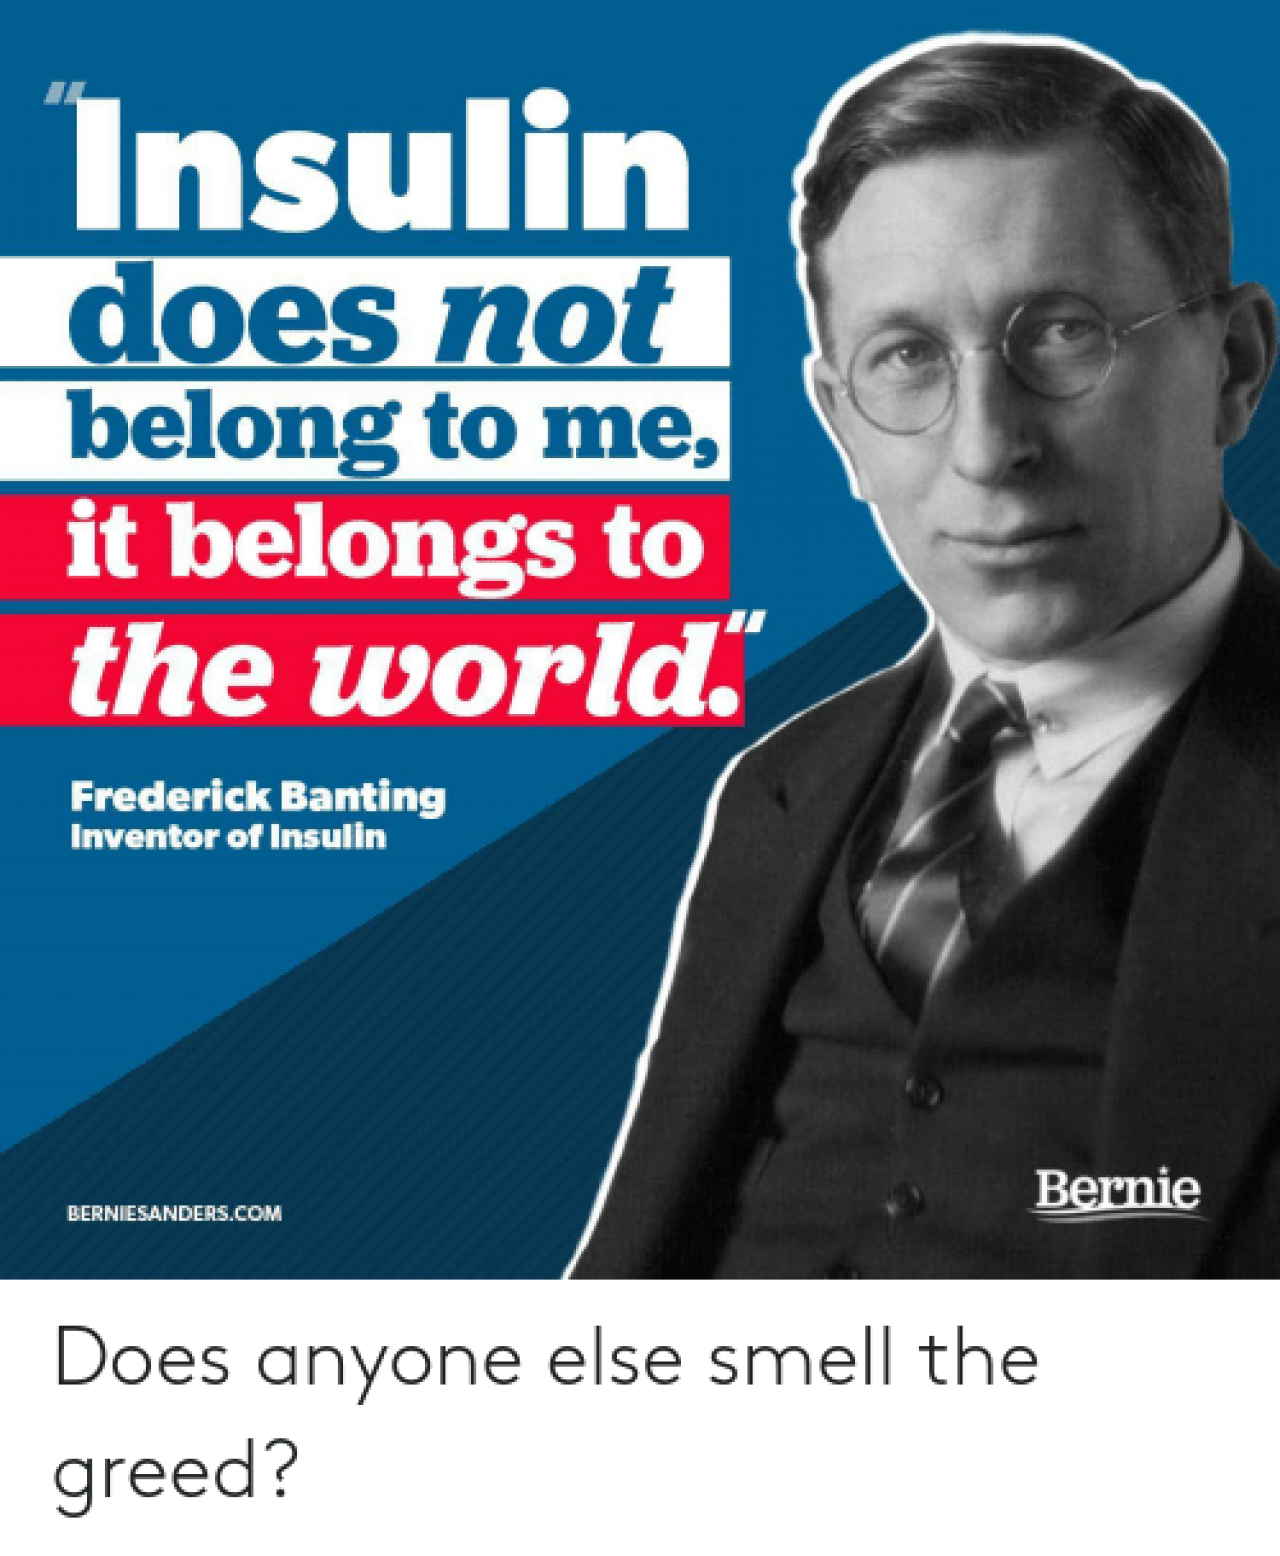 ed319406-insulin-does-not-belong-to-me-it-belongs-to-the-66840612.png